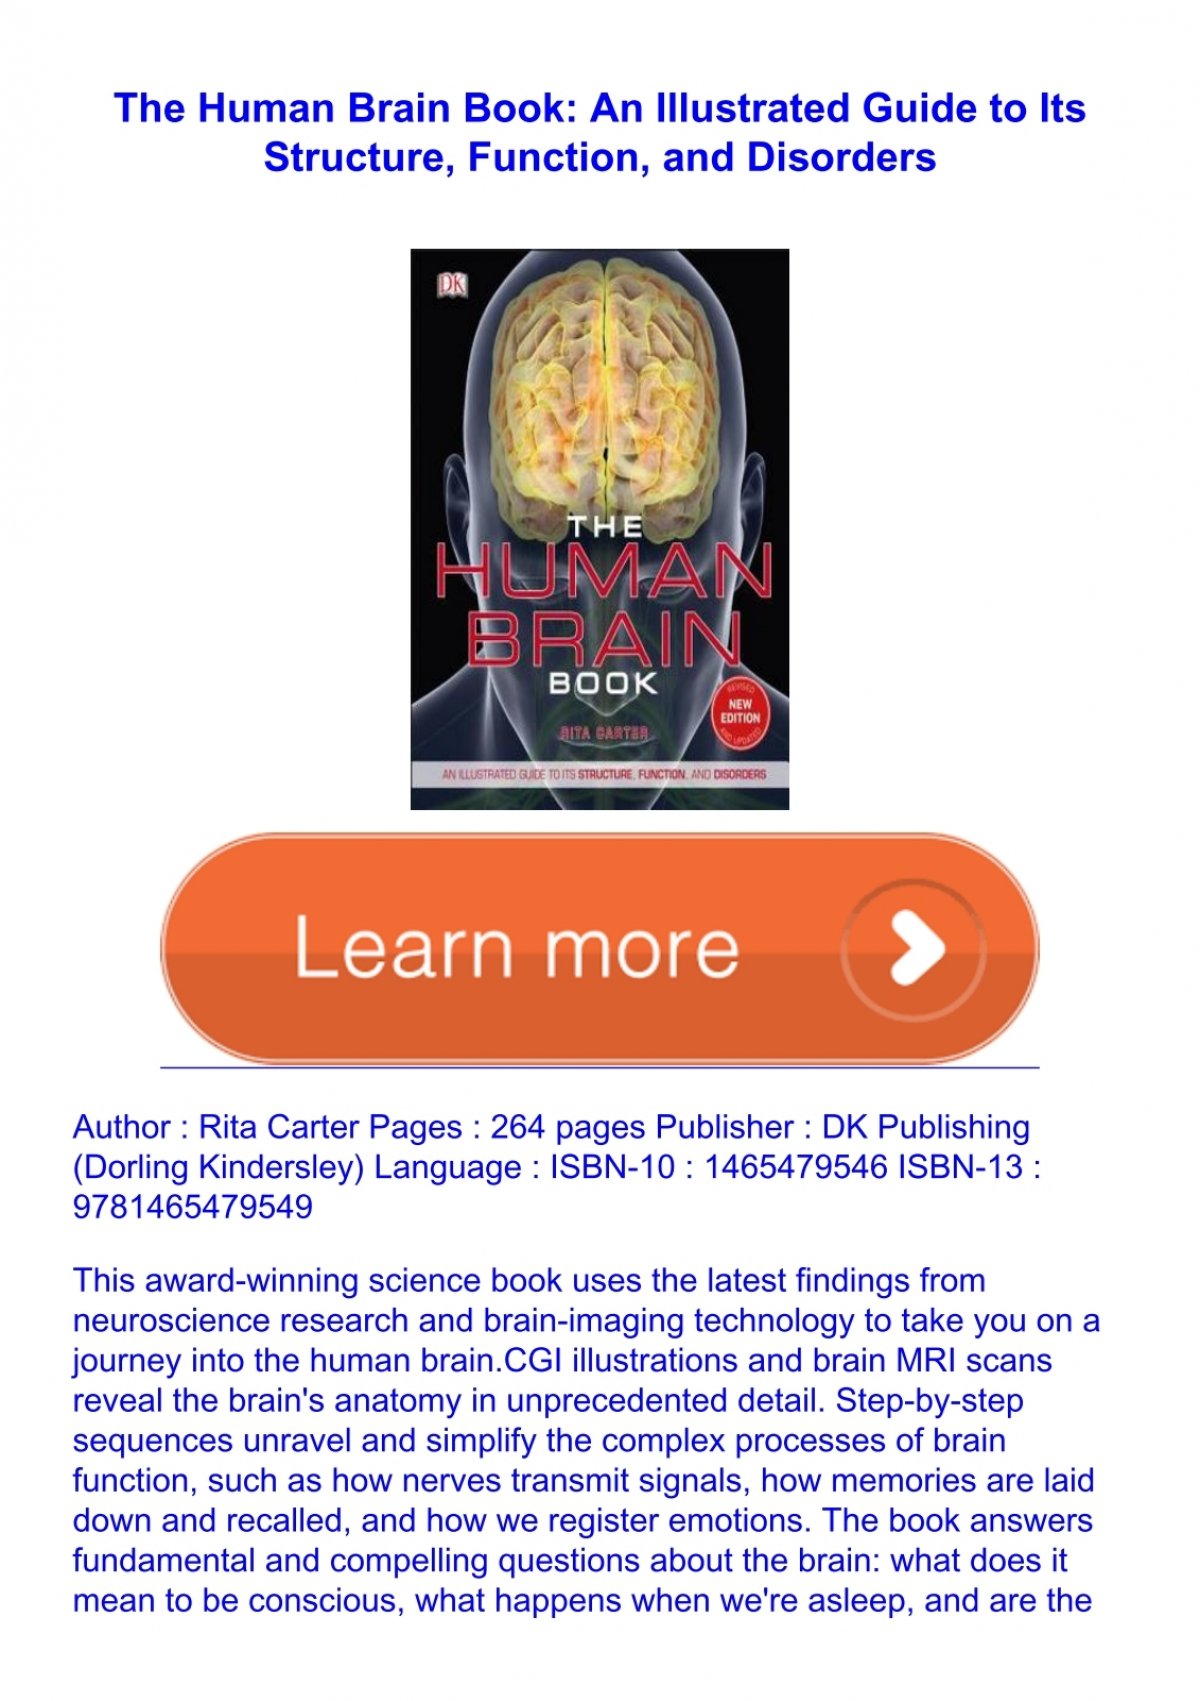 Leia EPUB The Human Brain Book An Illustrated Guide To Its Structure Function And